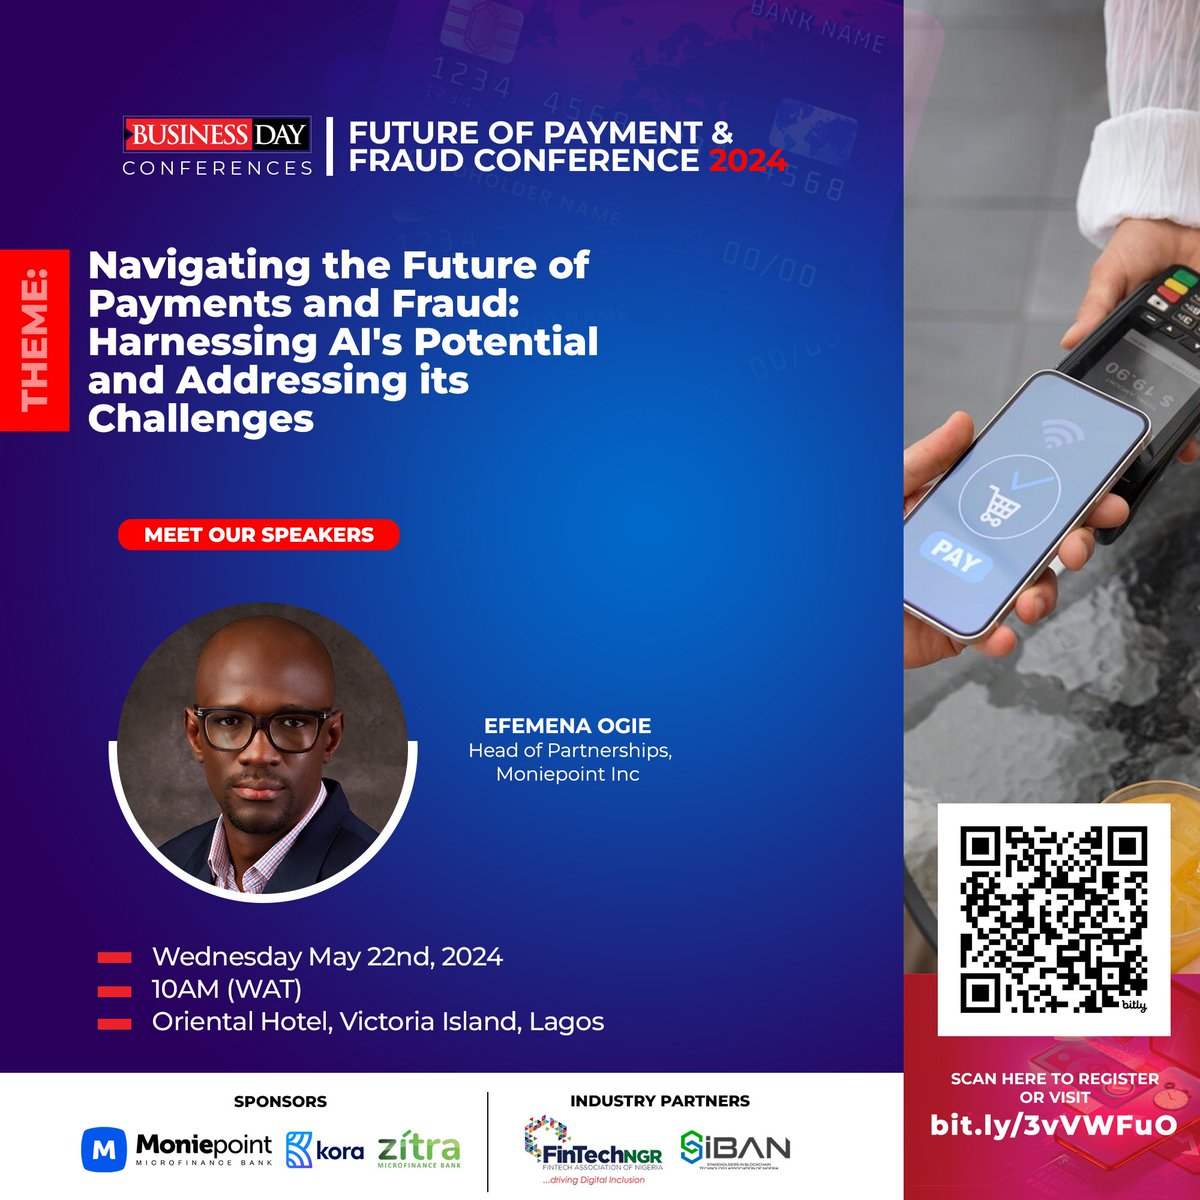 Hurray! It’s finally happening tomorrow..  

Join us for an unforgettable experience at the BusinessDay Future of Payment and Fruad Conference 2024 featuring renowned speakers -  

Mr. Kolawole Dahursi of @zitrainvestment   
Mr. Enyioma Madubuike of @thekorahq 
Mr. EFEMENA OGIE